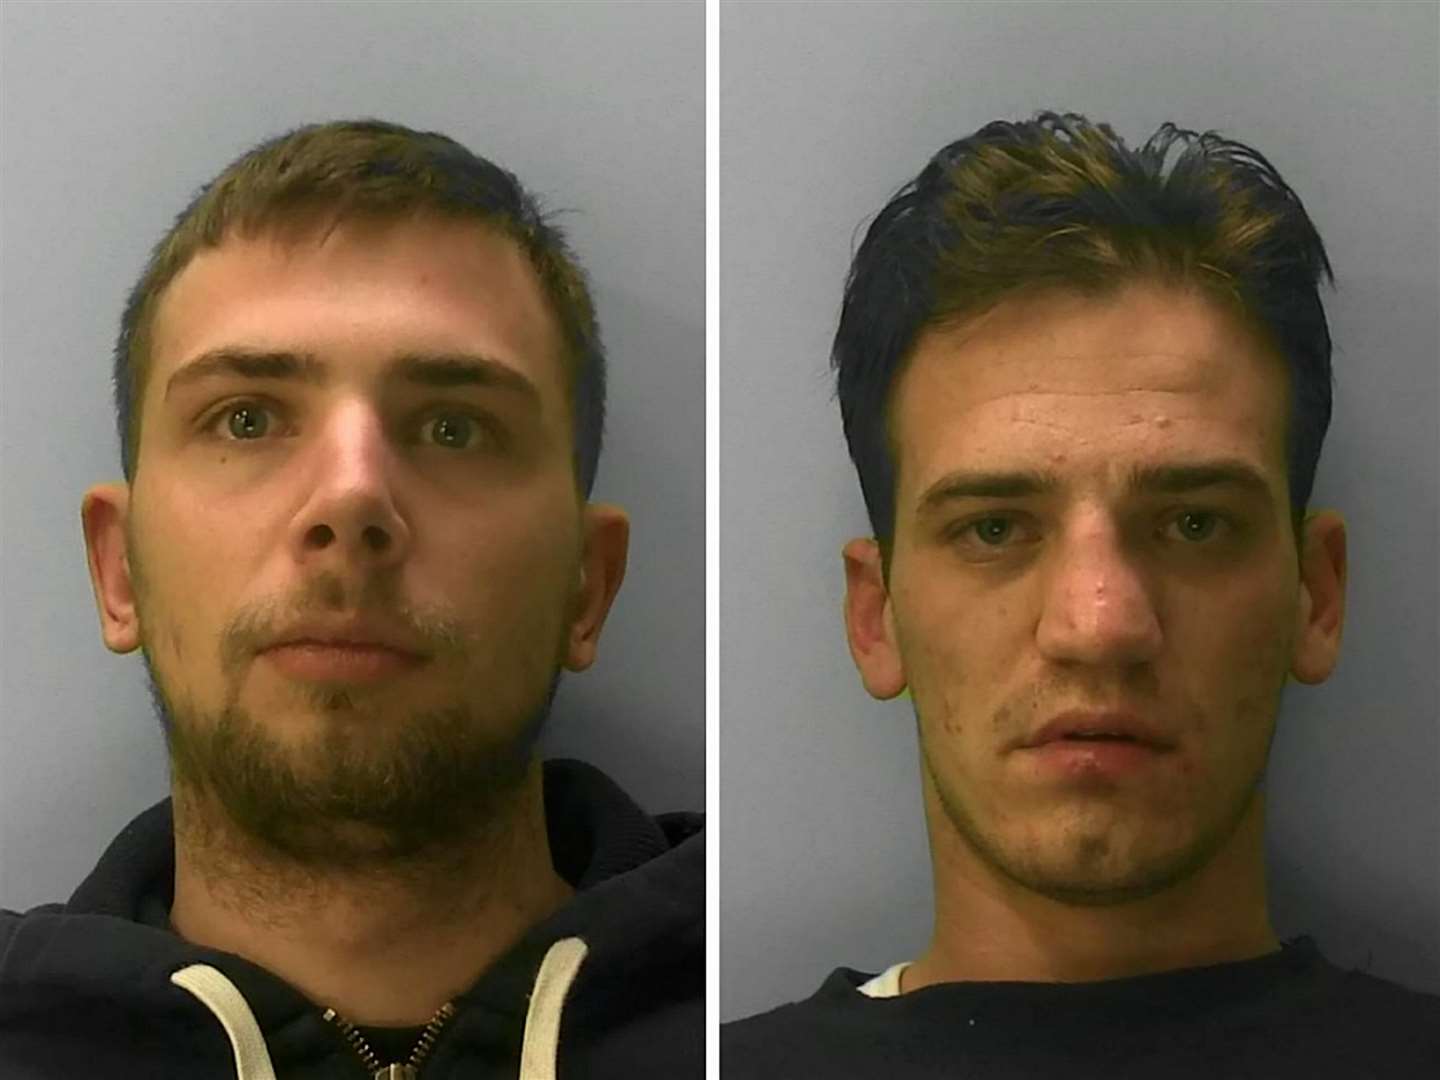 Thomas Munday, 25, and Billy Draper, 22. Picture: Sussex Police/SWNS